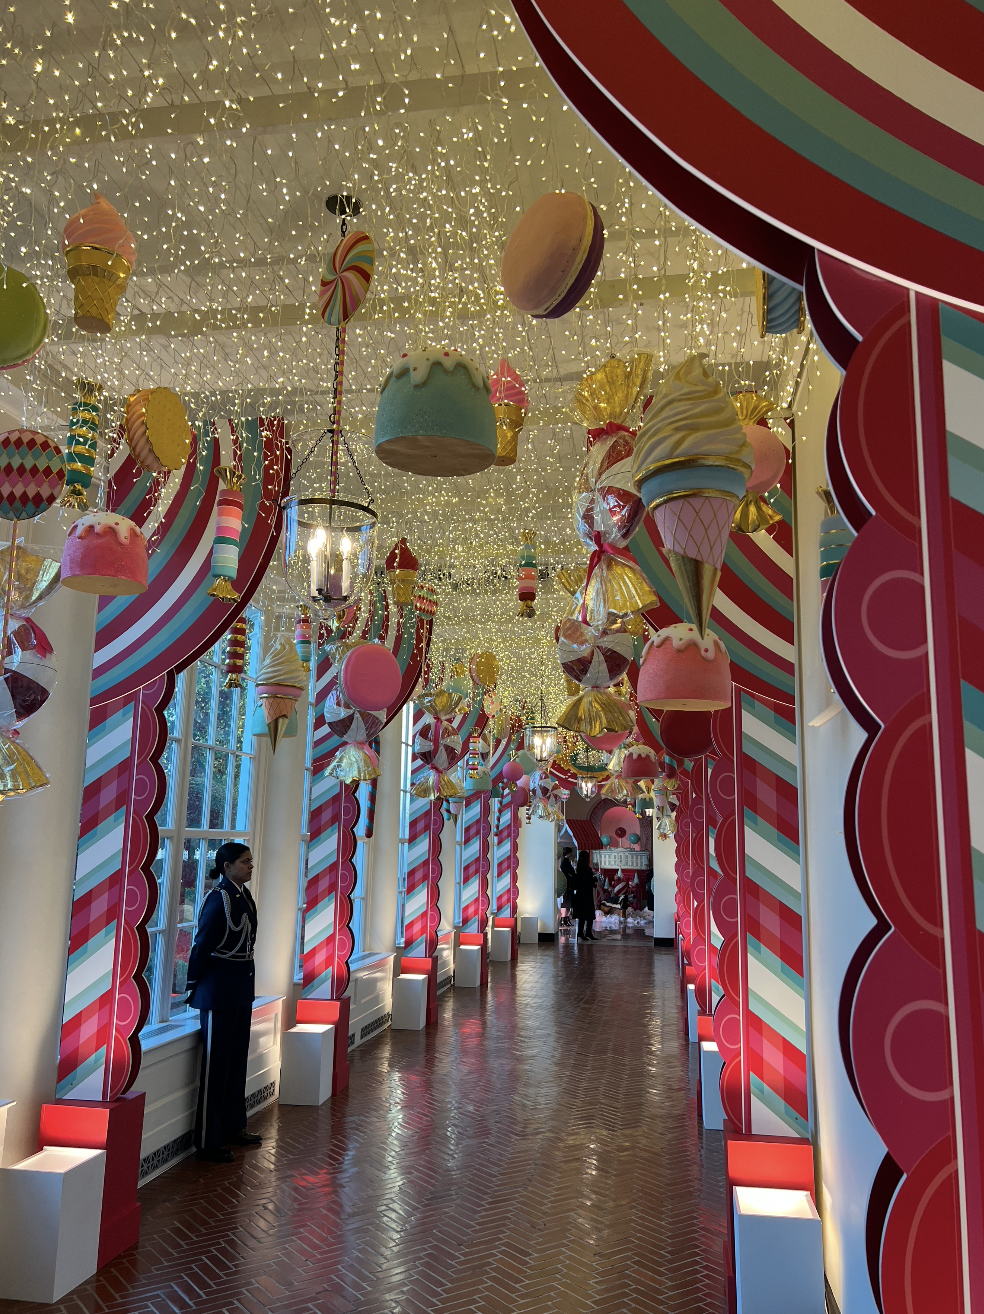 A hallway in the White House decorated with large pieces of candy hanging from the ceiling. 